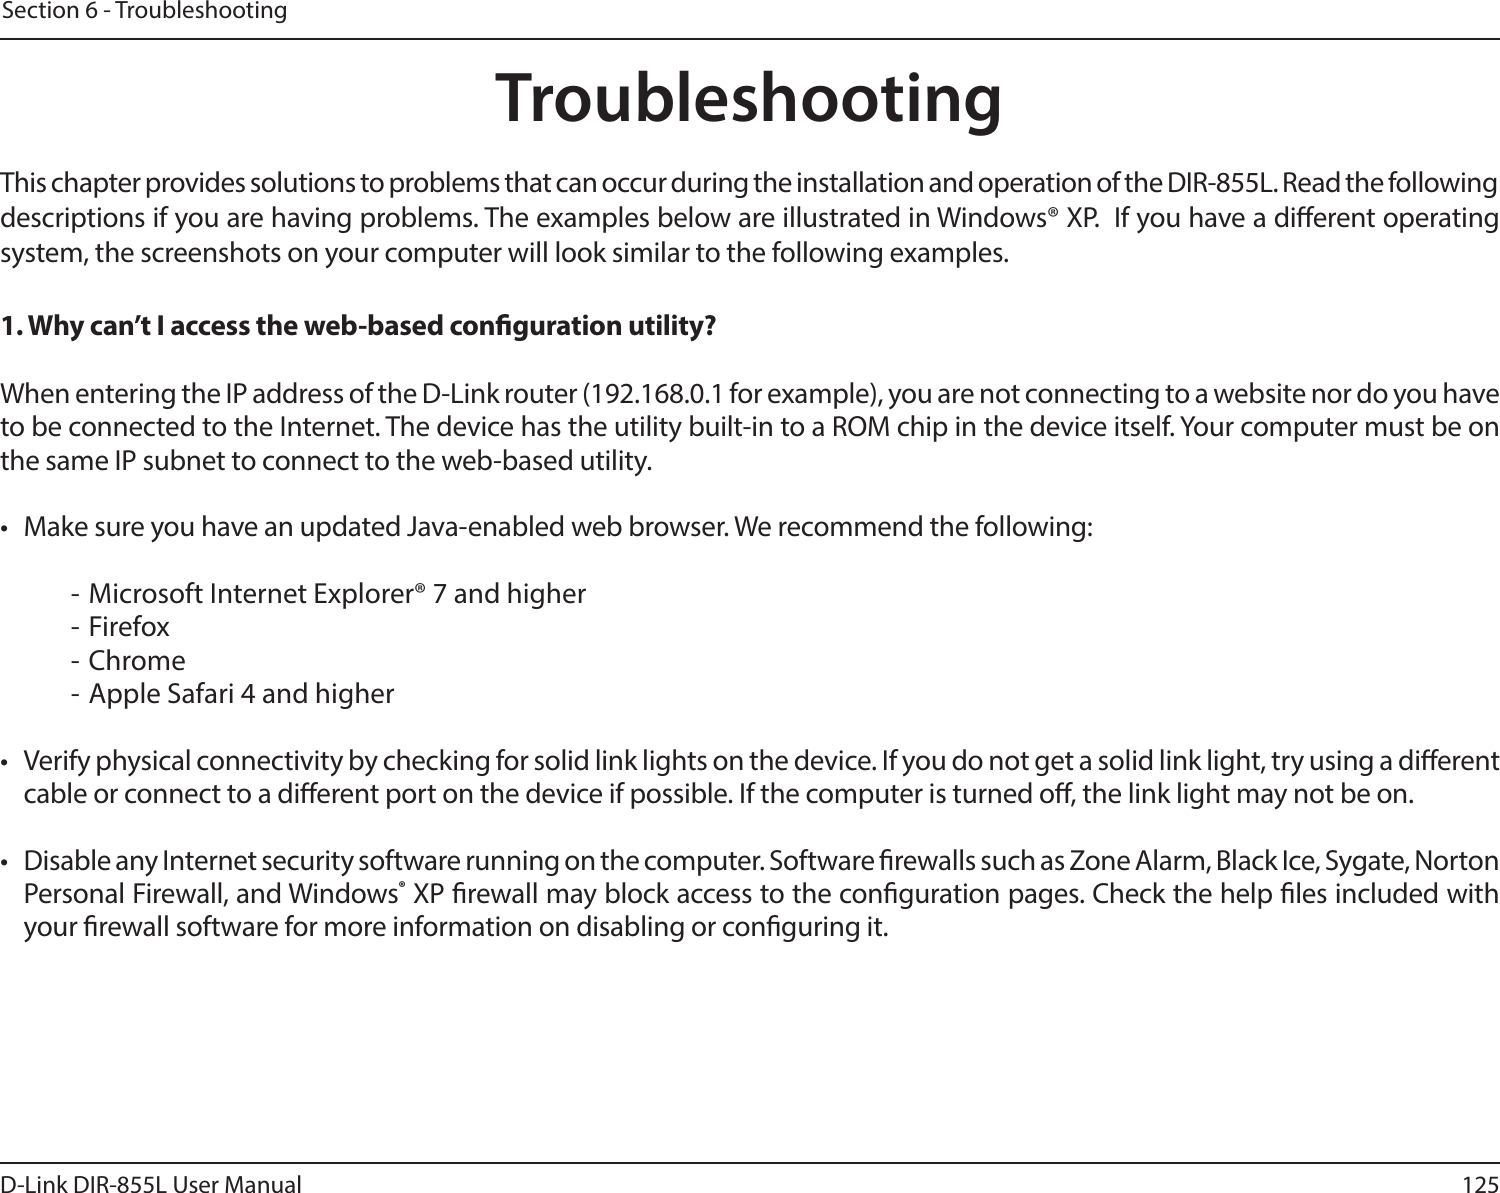 125D-Link DIR-855L User ManualSection 6 - TroubleshootingTroubleshootingThis chapter provides solutions to problems that can occur during the installation and operation of the DIR-855L. Read the following descriptions if you are having problems. The examples below are illustrated in Windows® XP.  If you have a dierent operating system, the screenshots on your computer will look similar to the following examples.1. Why can’t I access the web-based conguration utility?When entering the IP address of the D-Link router (192.168.0.1 for example), you are not connecting to a website nor do you have to be connected to the Internet. The device has the utility built-in to a ROM chip in the device itself. Your computer must be on the same IP subnet to connect to the web-based utility. •  Make sure you have an updated Java-enabled web browser. We recommend the following:  - Microsoft Internet Explorer® 7 and higher- Firefox- Chrome- Apple Safari 4 and higher•  Verify physical connectivity by checking for solid link lights on the device. If you do not get a solid link light, try using a dierent cable or connect to a dierent port on the device if possible. If the computer is turned o, the link light may not be on.•  Disable any Internet security software running on the computer. Software rewalls such as Zone Alarm, Black Ice, Sygate, Norton Personal Firewall, and Windows® XP rewall may block access to the conguration pages. Check the help les included with your rewall software for more information on disabling or conguring it.